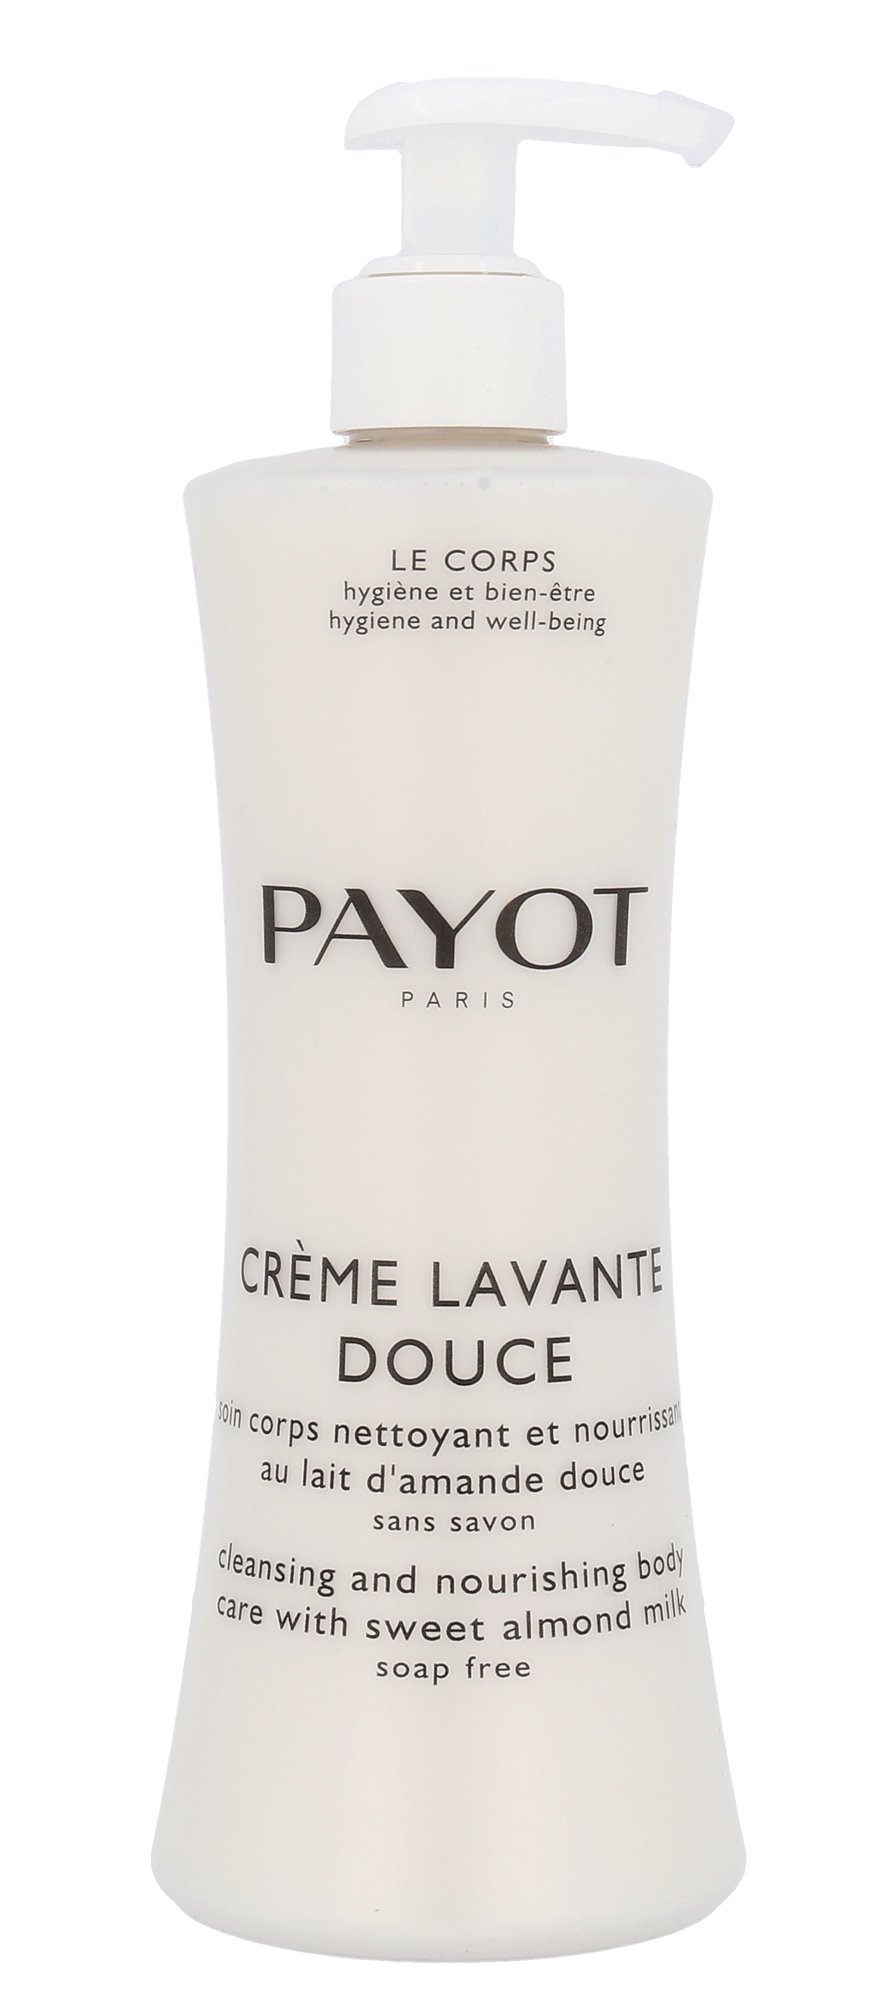 Payot Le Corps Cleansing And Nourishing Body Care 400ml dušo kremas